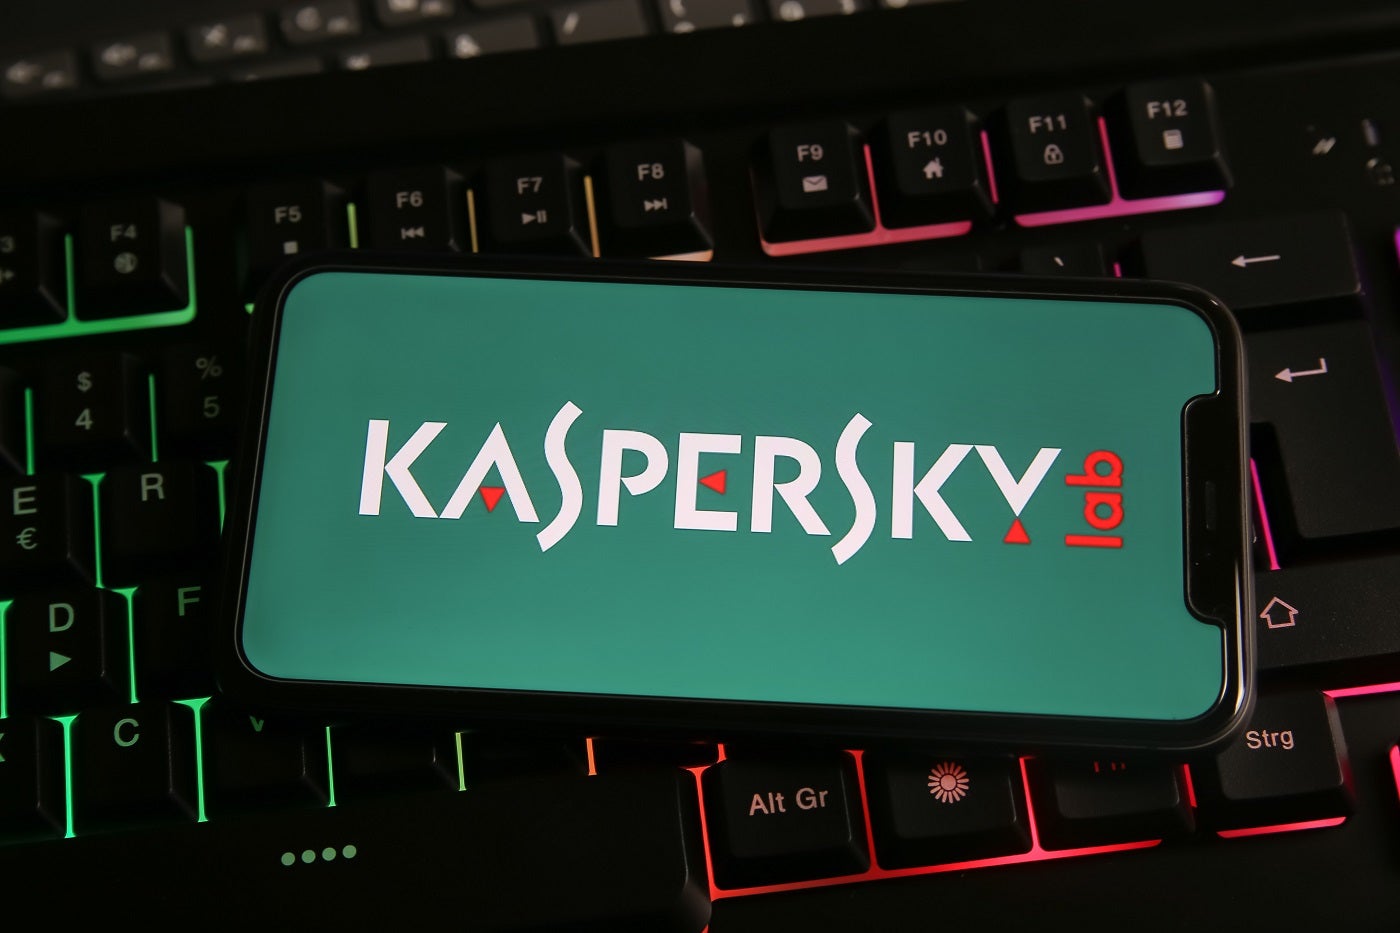 Kaspersky gaming-related threat report 2023